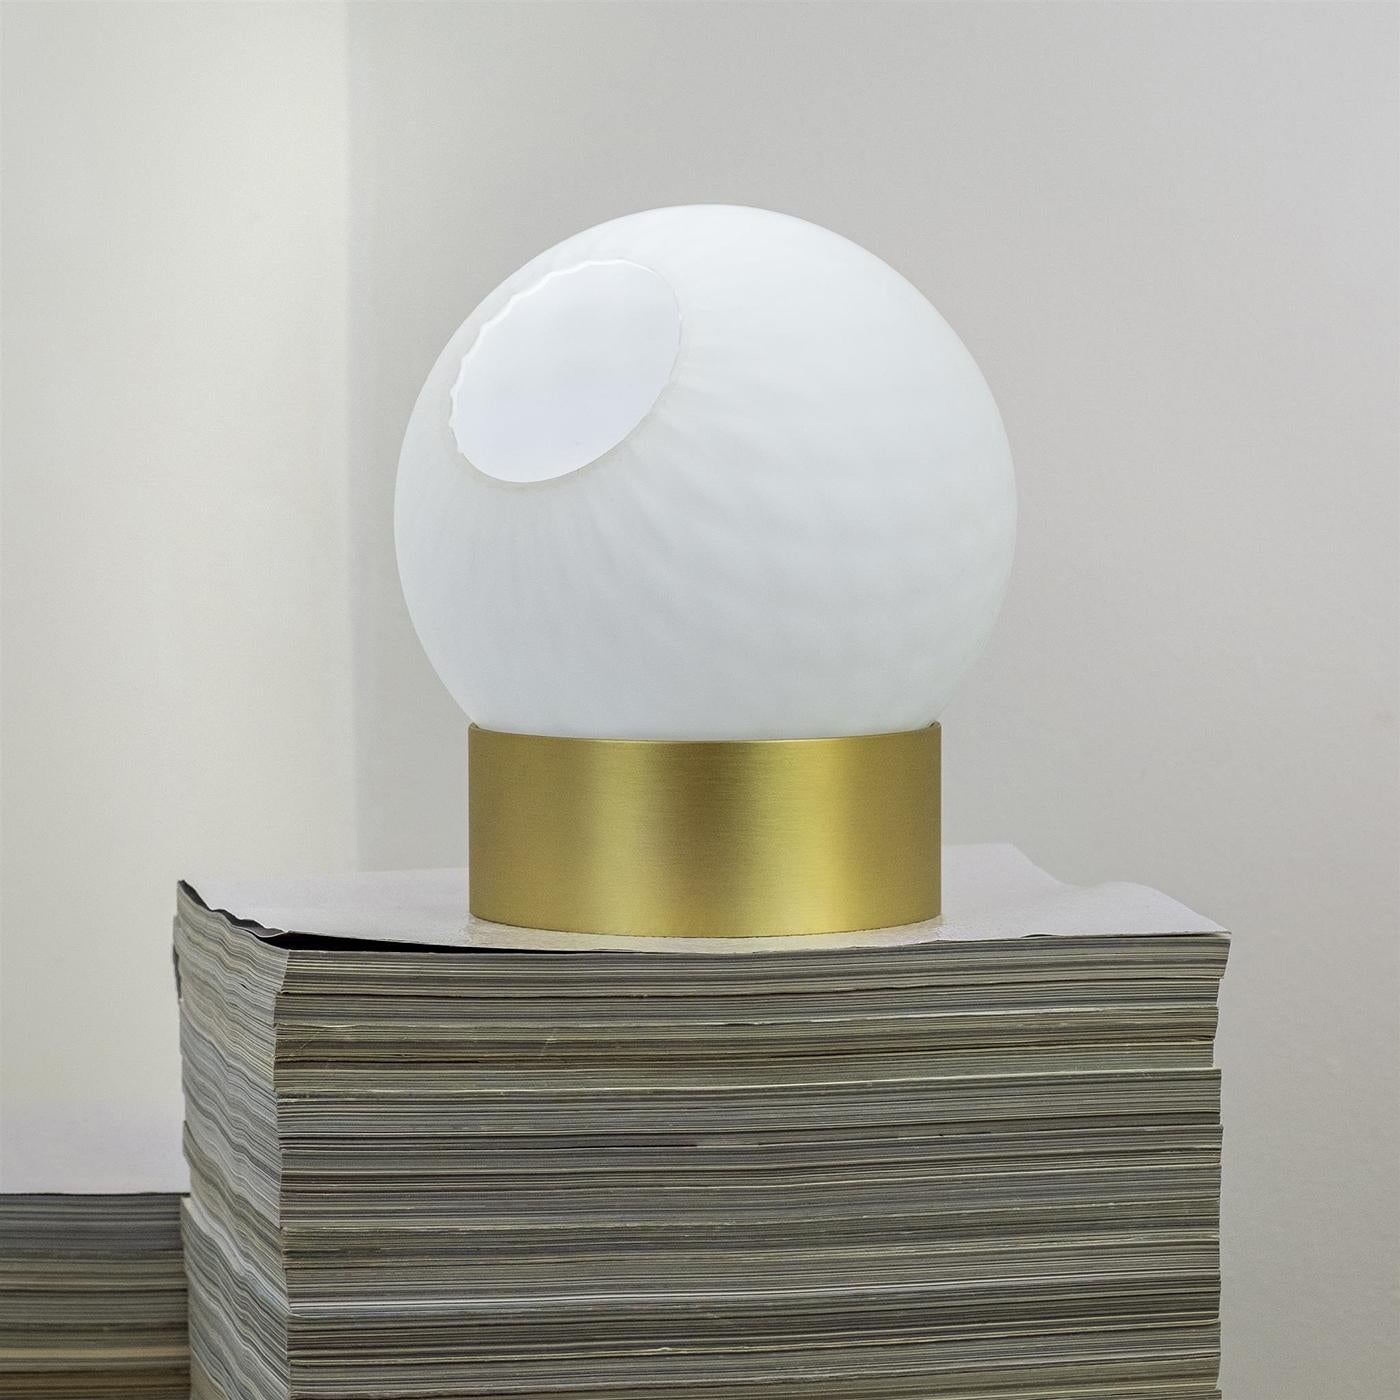 Reinventing a stunning Murano sphere from a discontinued collection by a renowned brand in the Brianza district, this sculptural vase belongs to a limited edition of 50 handcrafted pieces. The spherical recipient fashioned of opaline white Murano